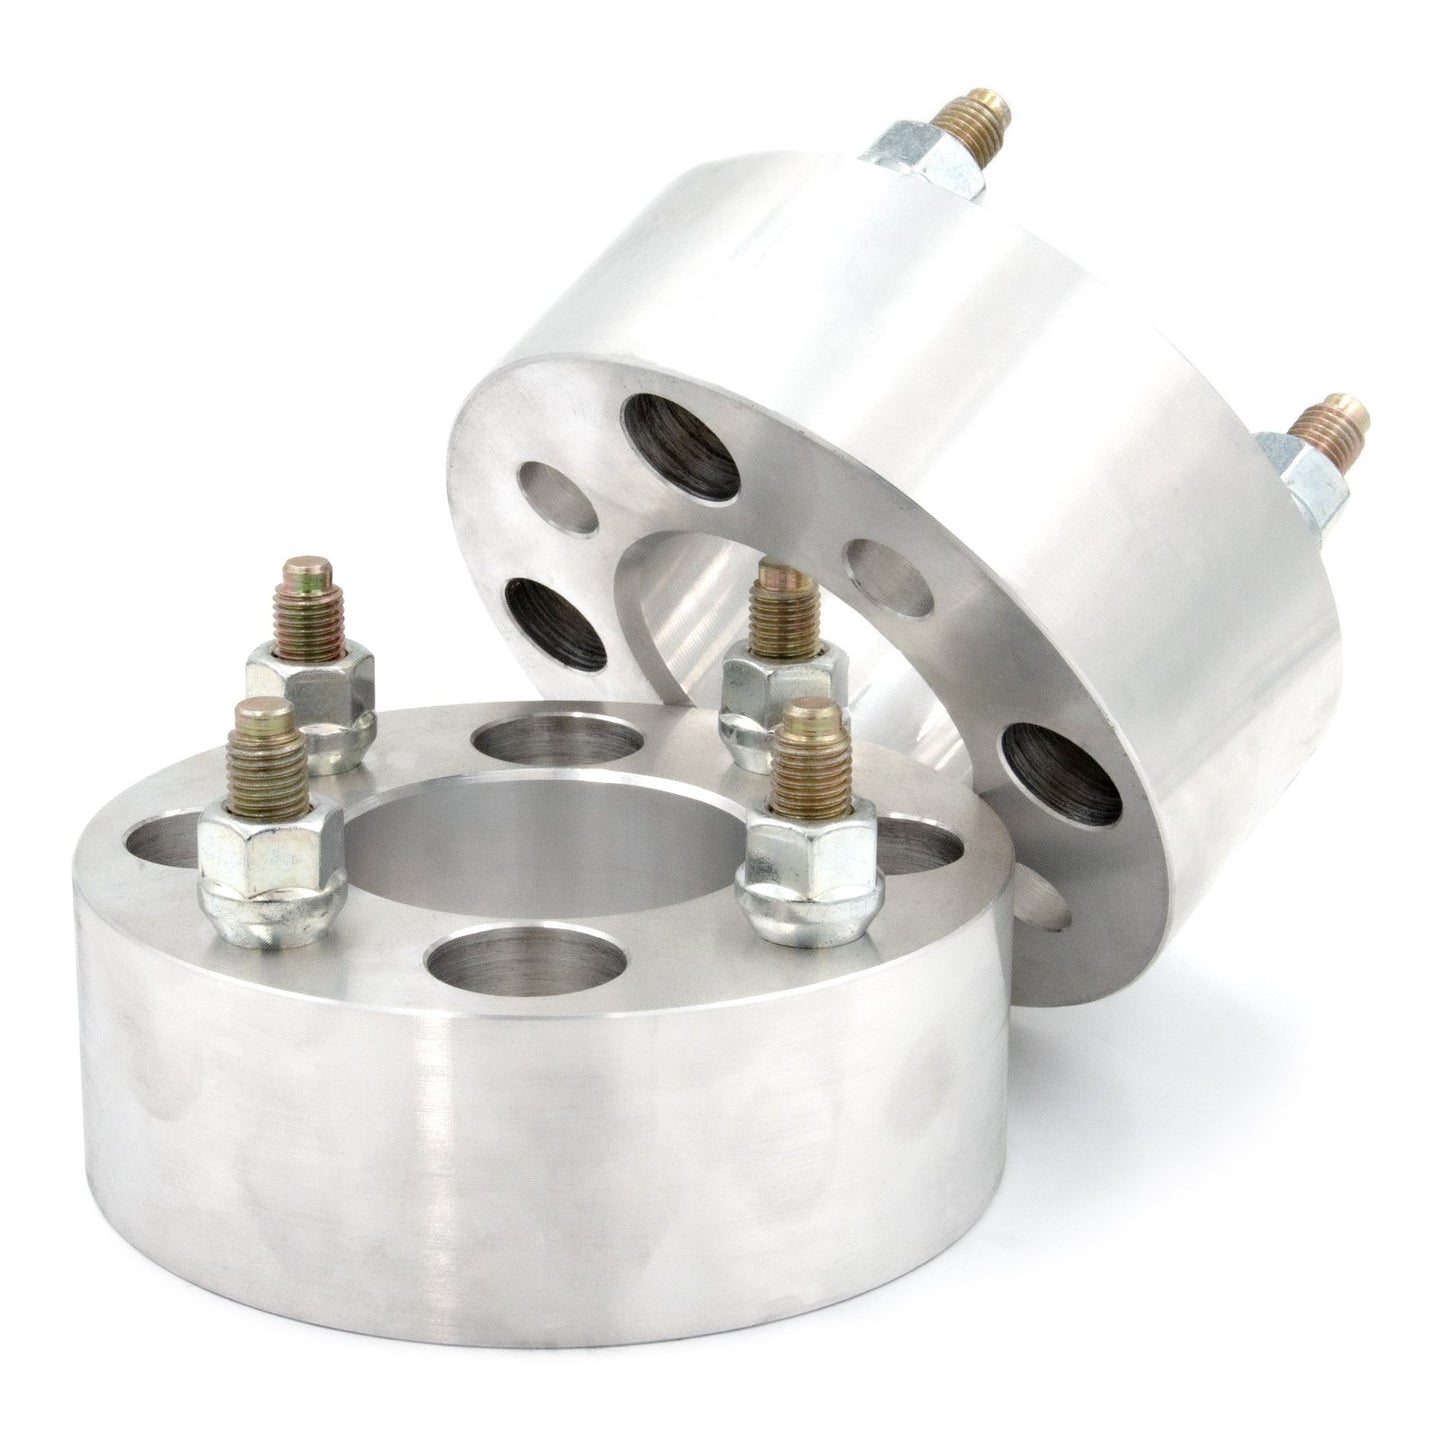 4x4" to 4x137 Wheel Spacer/Adapter - Thickness: 3/4"- 4"